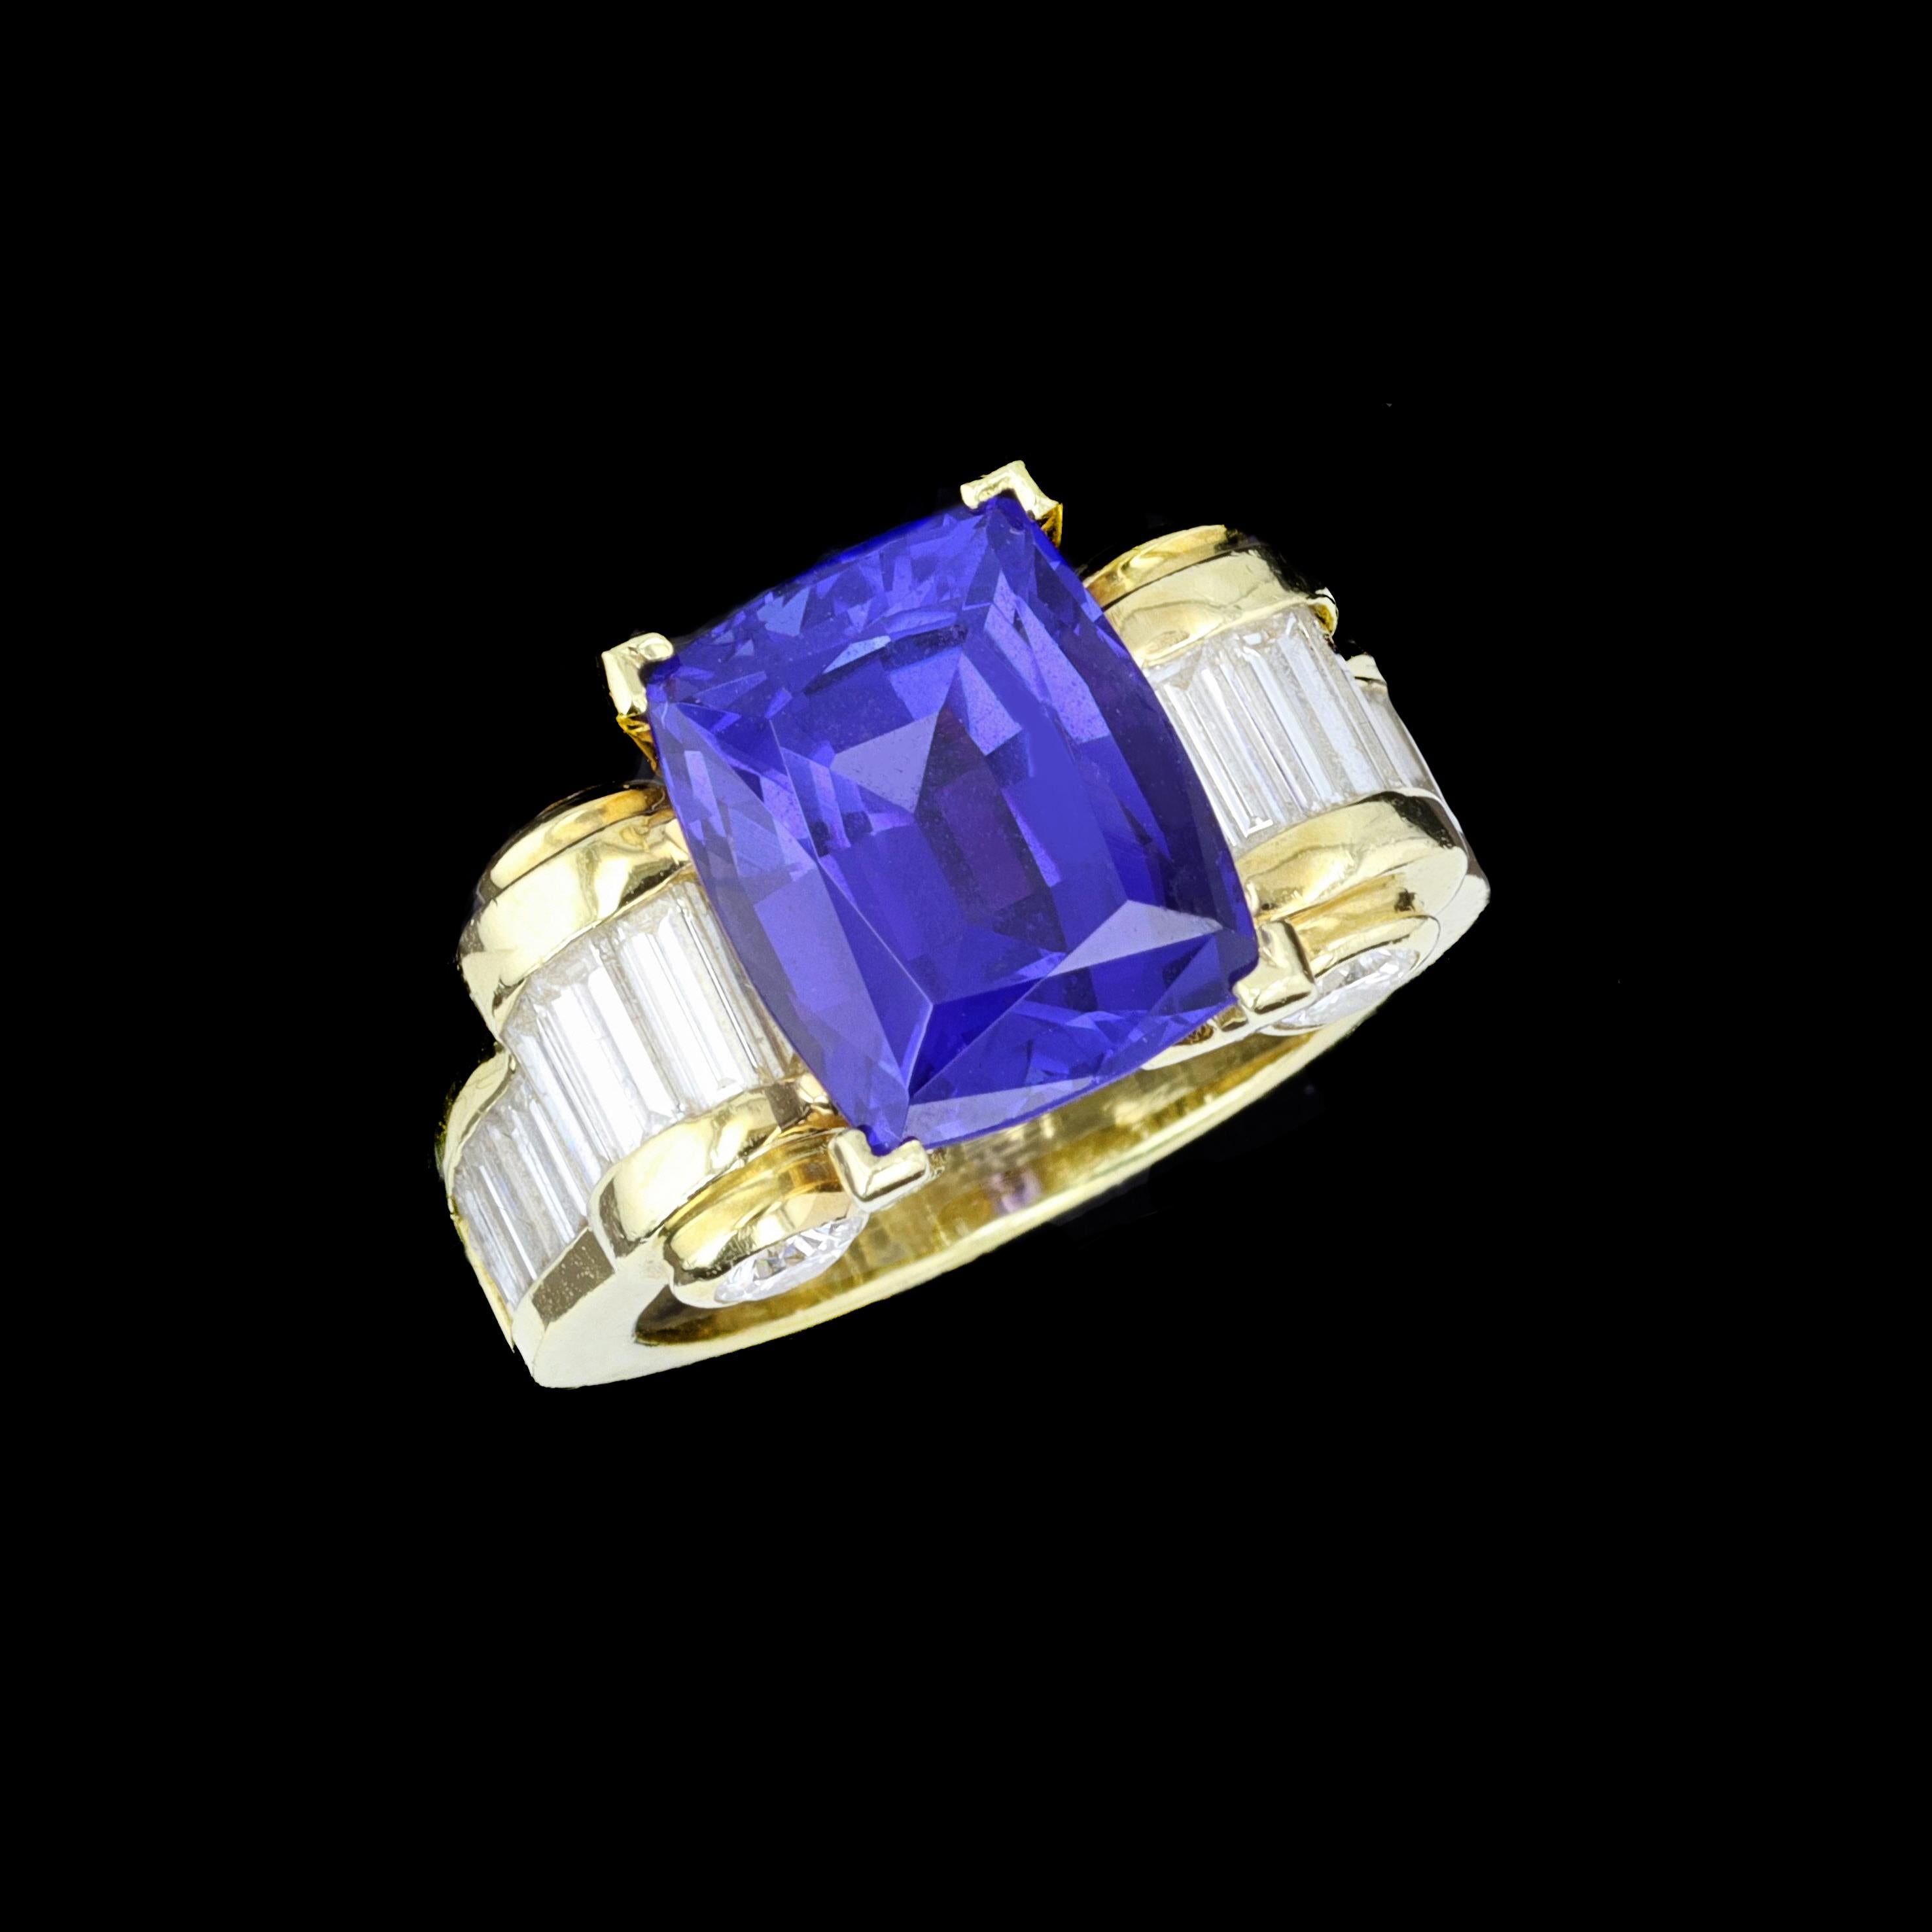 The ultimate cocktail ring to catch everyone's attention. Crafted in 18 karat yellow gold, an emerald cut 6.00 carat tanzanite shines at the center of the ring. Baguette and round cut diamonds accentuate this remarkable center stone. The ring is